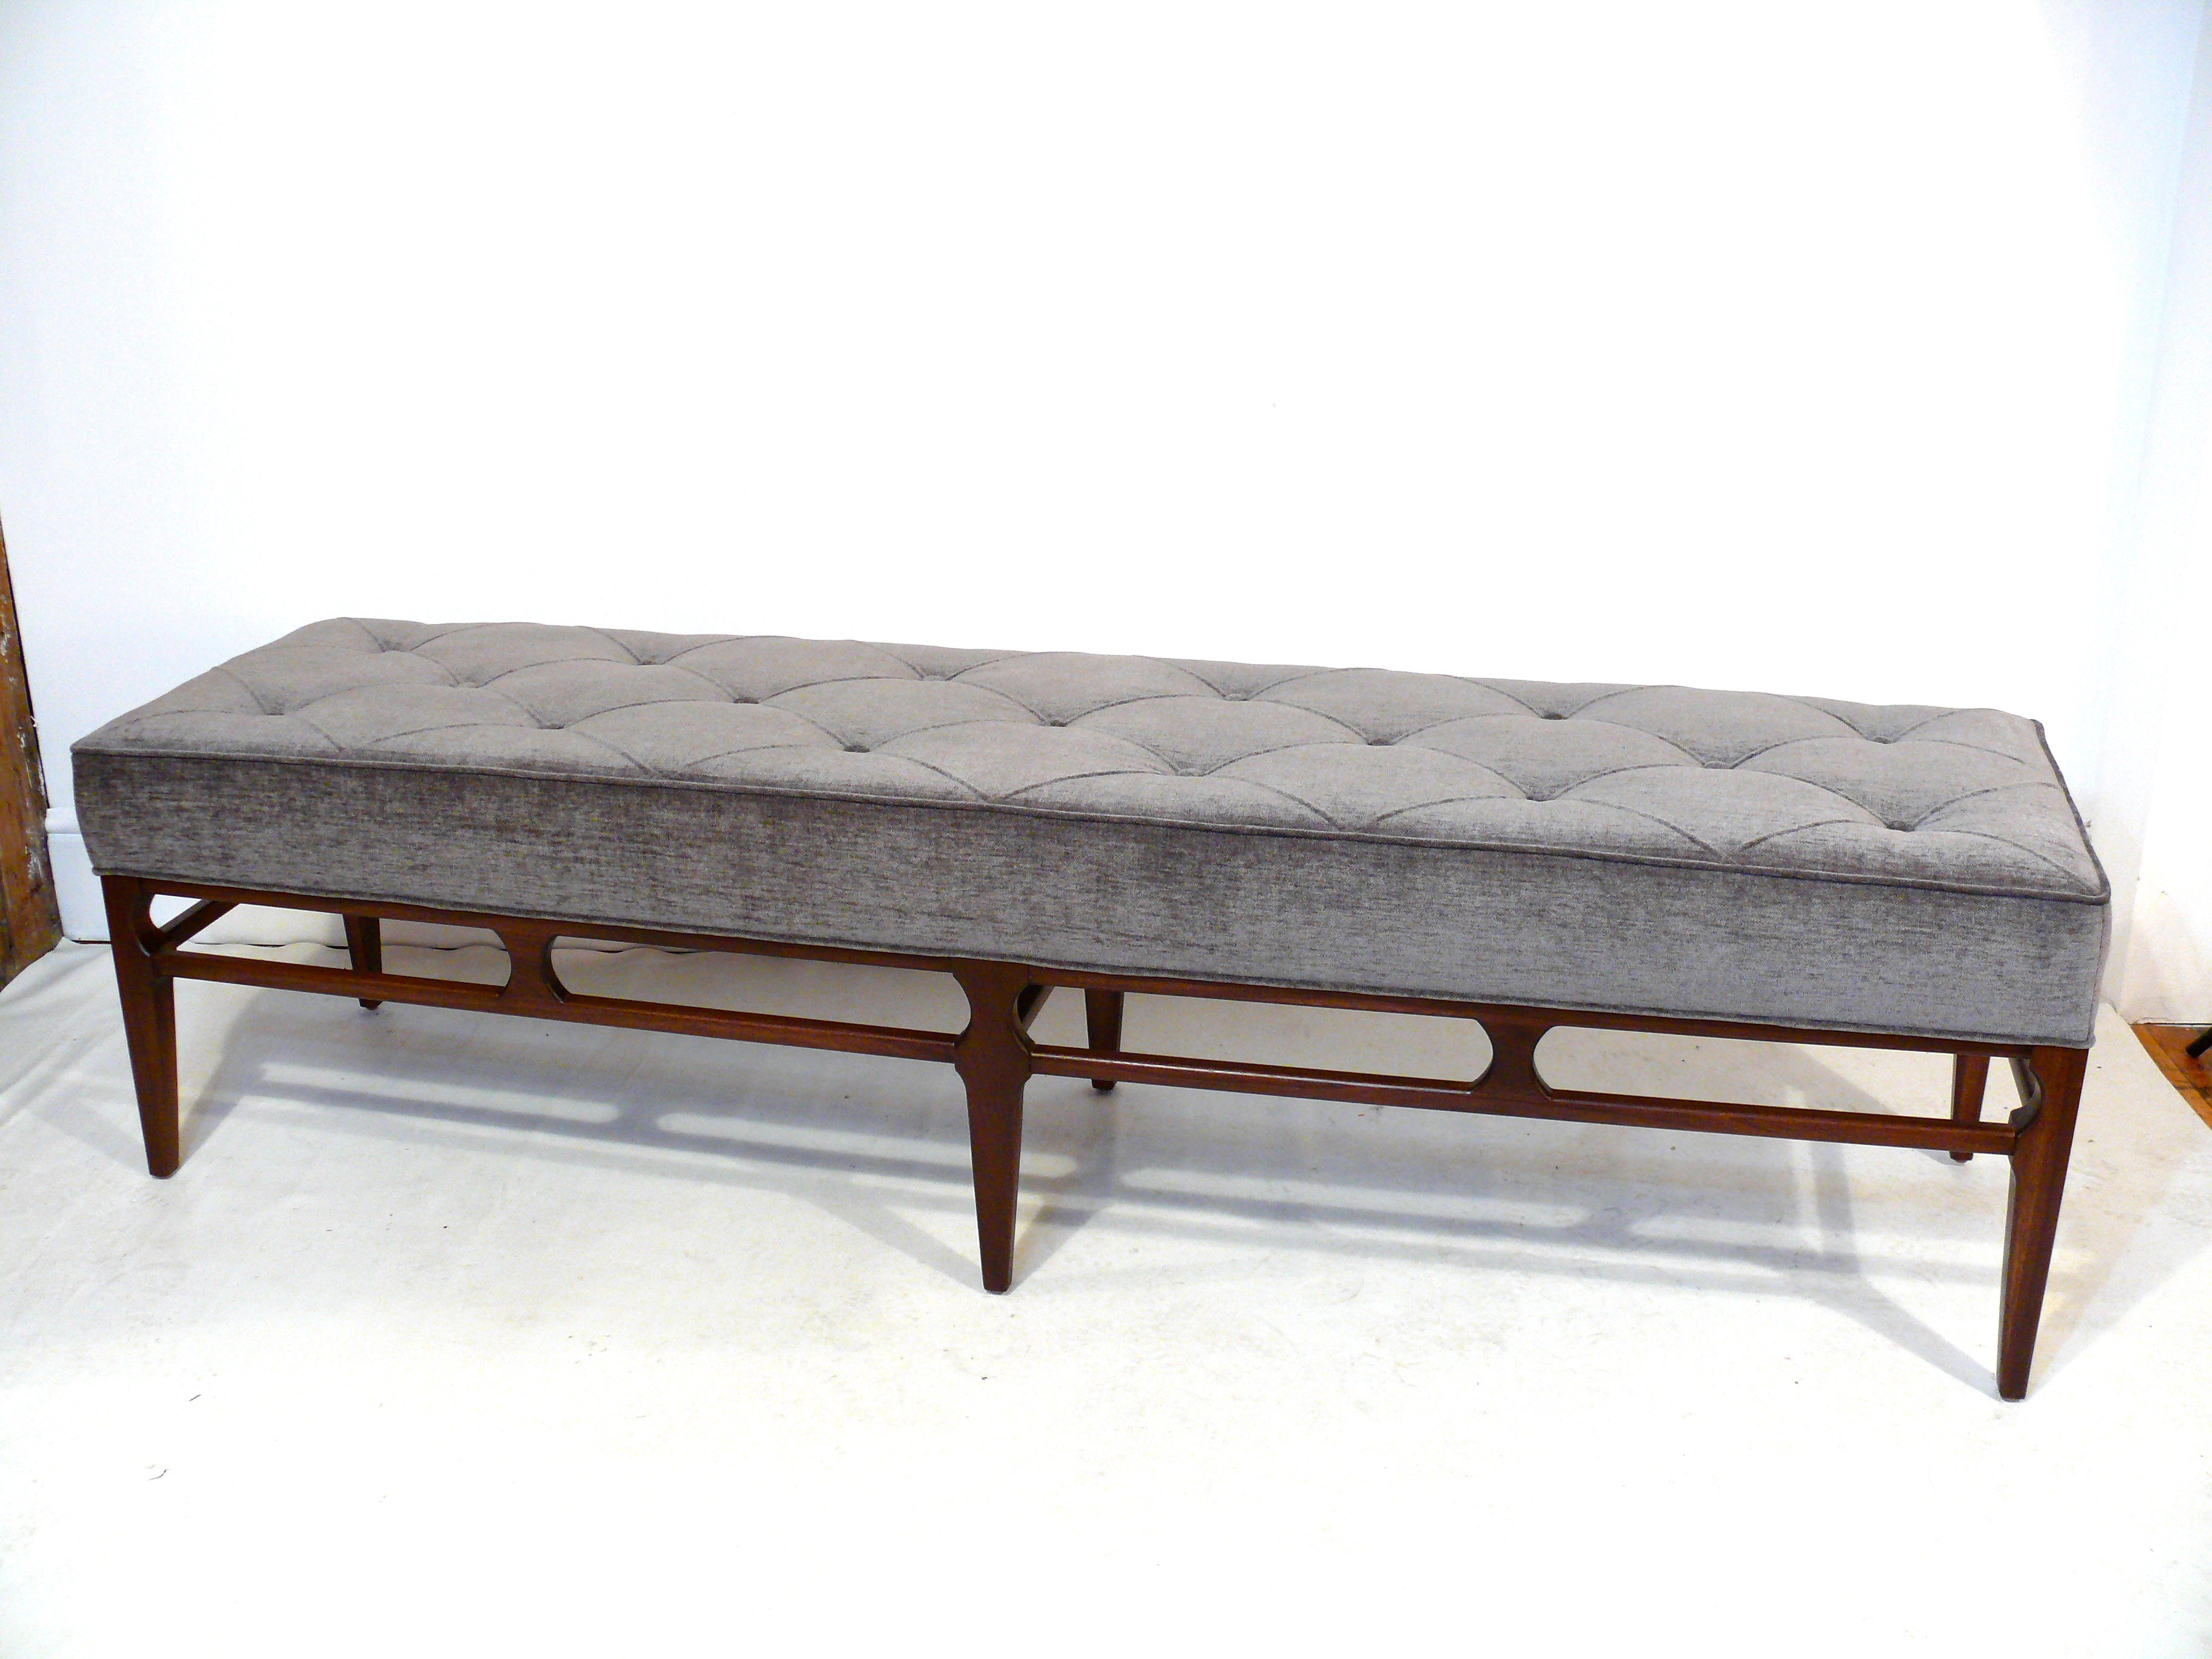 Proportion Tufted Bench